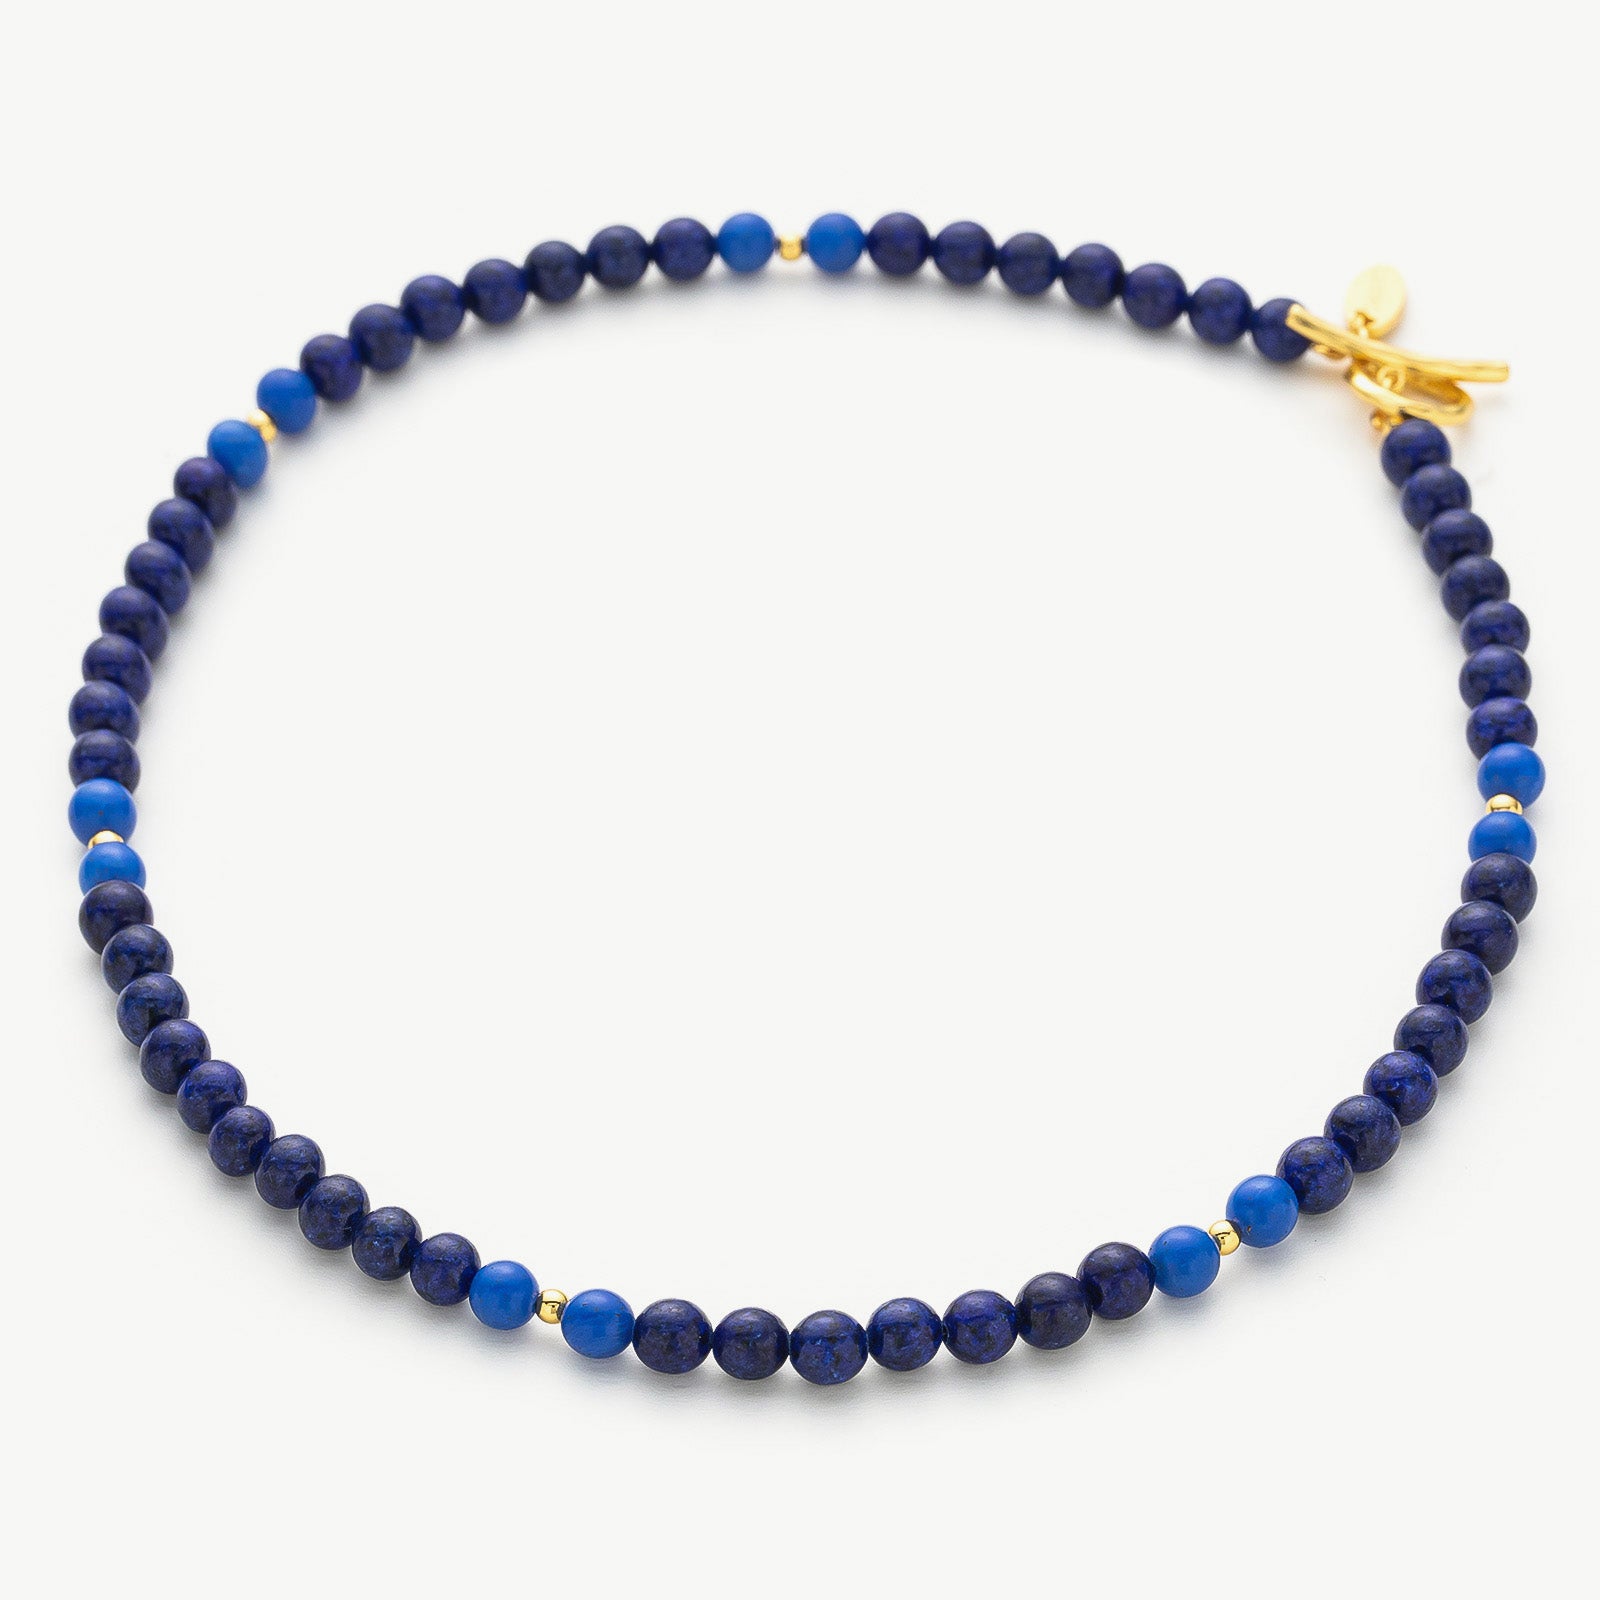 Lapis Blue Necklace, a chic lapis accent that enhances your style, showcasing the rich and vibrant blue tones of lapis lazuli in a stylish pendant for a fashionable statement.